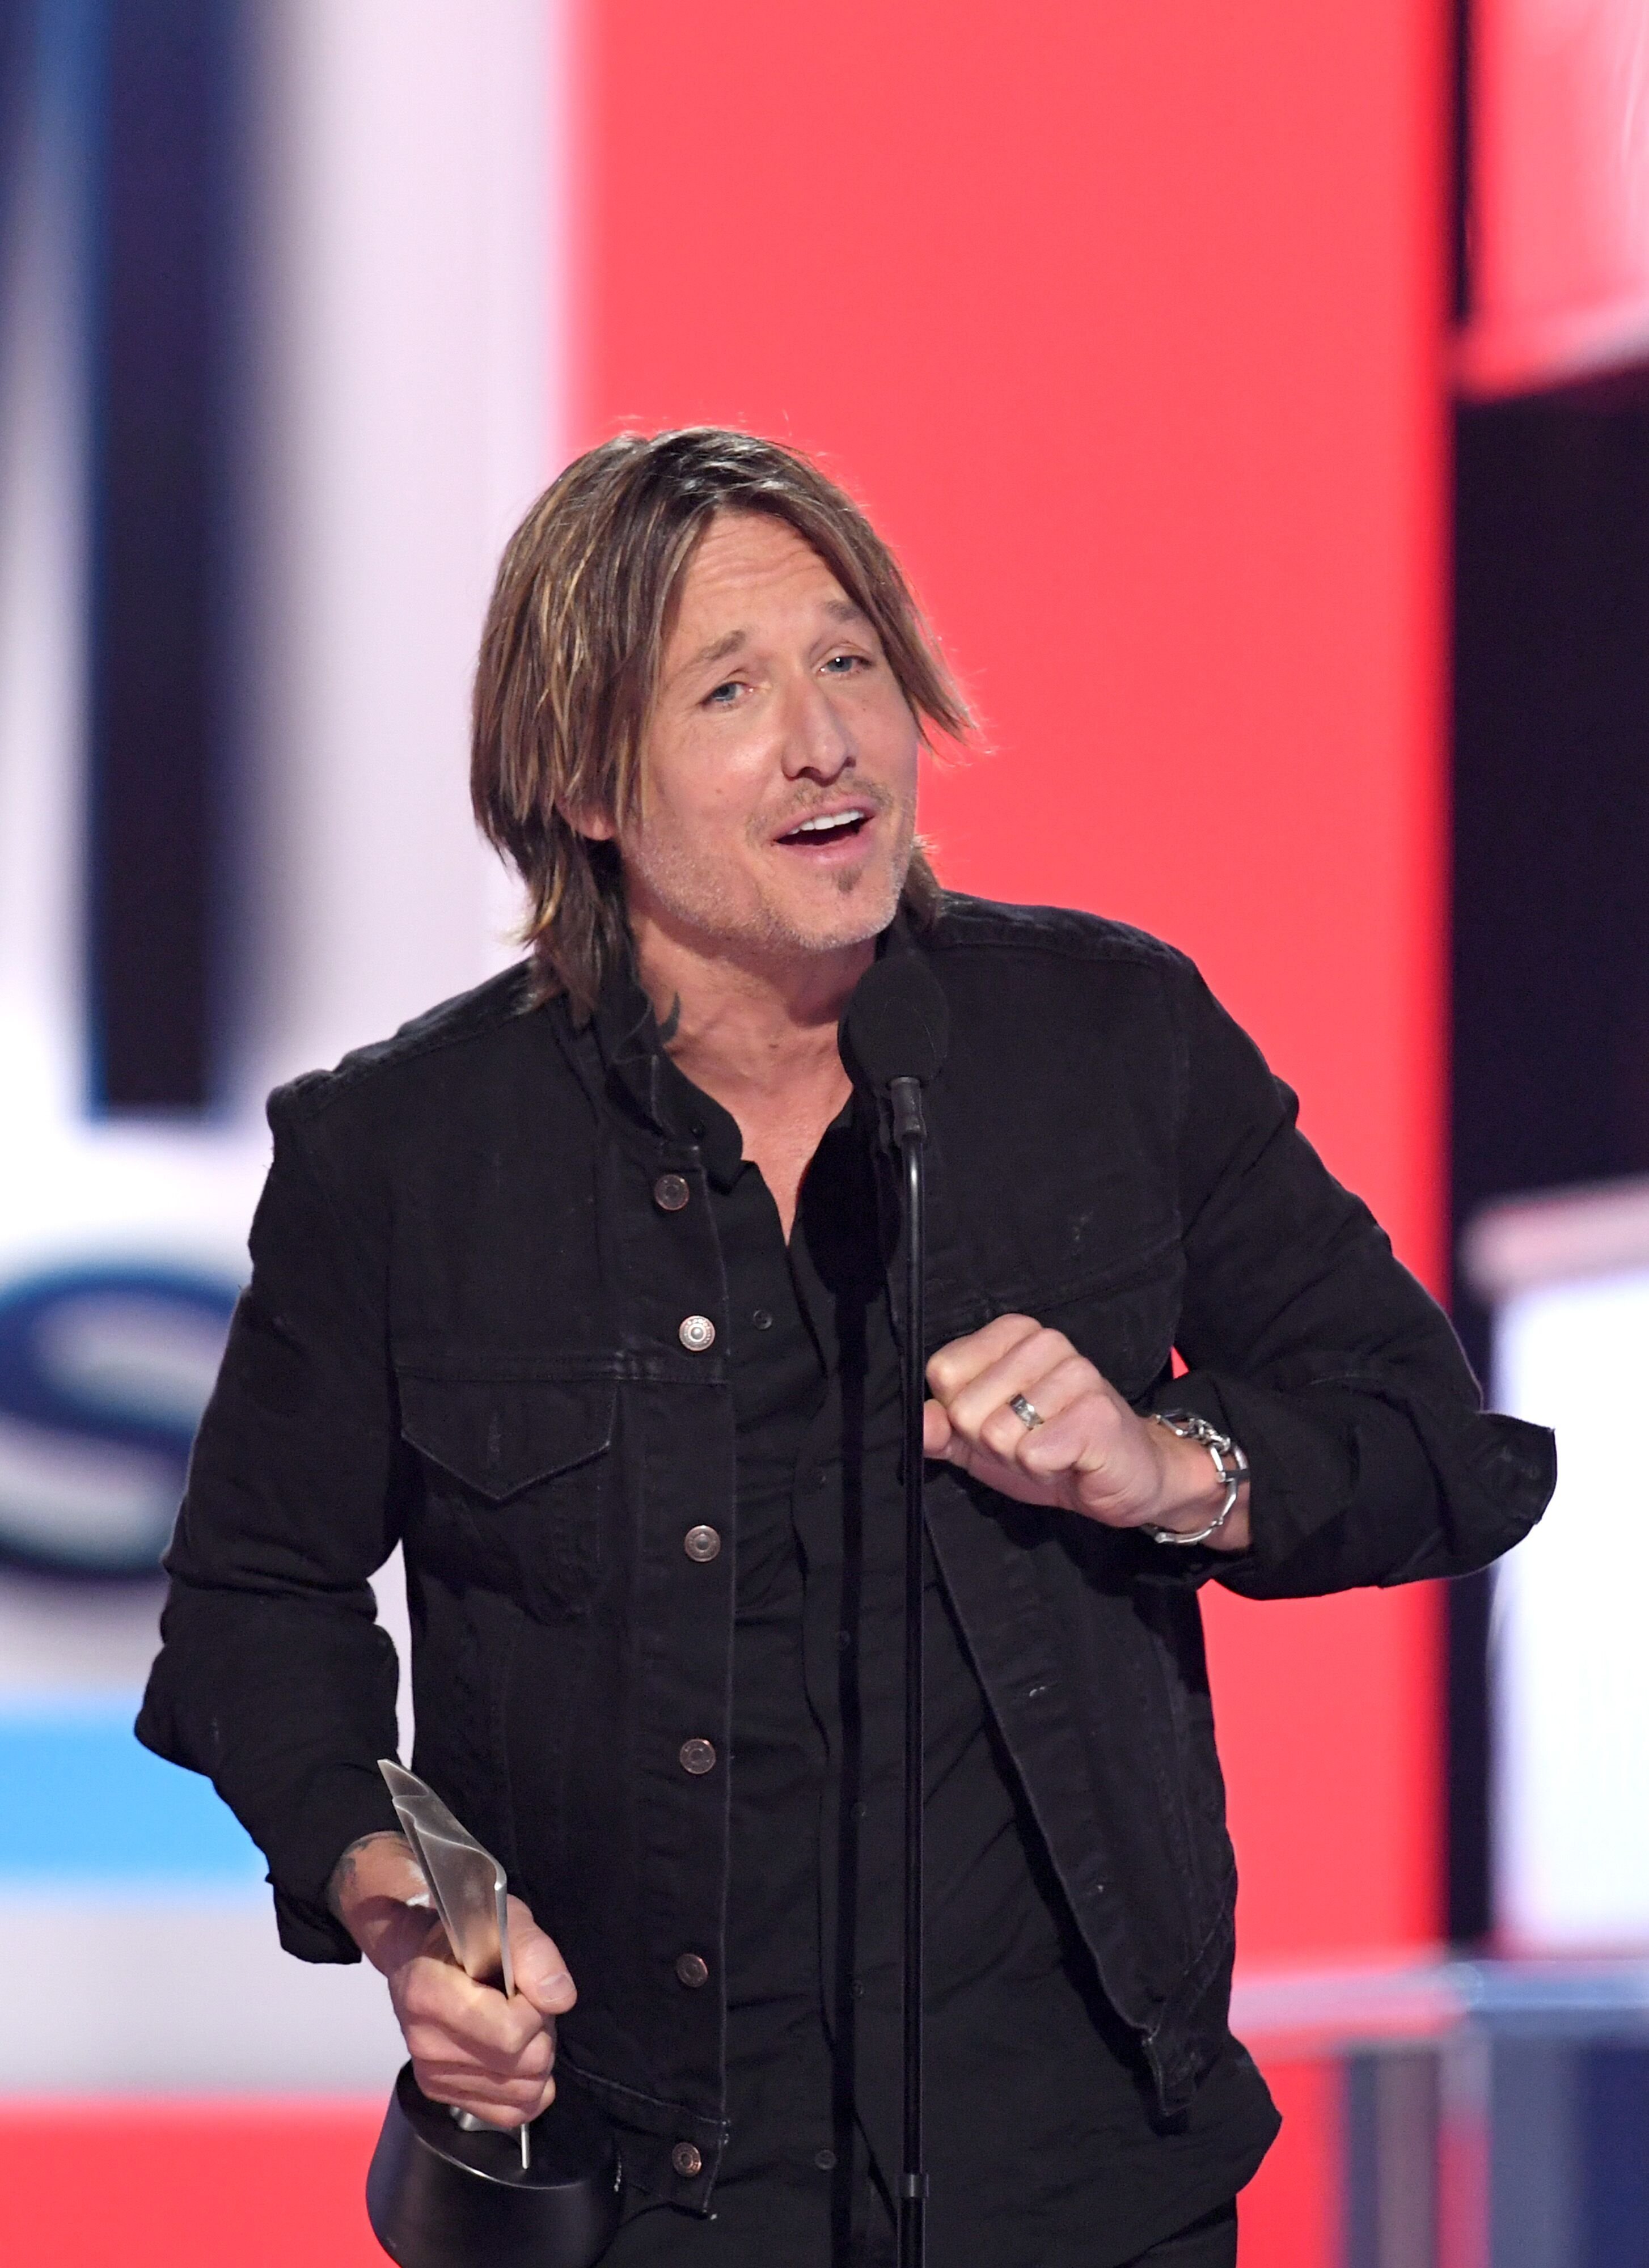 Keith Urban on April 07, 2019, in Las Vegas, Nevada | Source: Getty Images